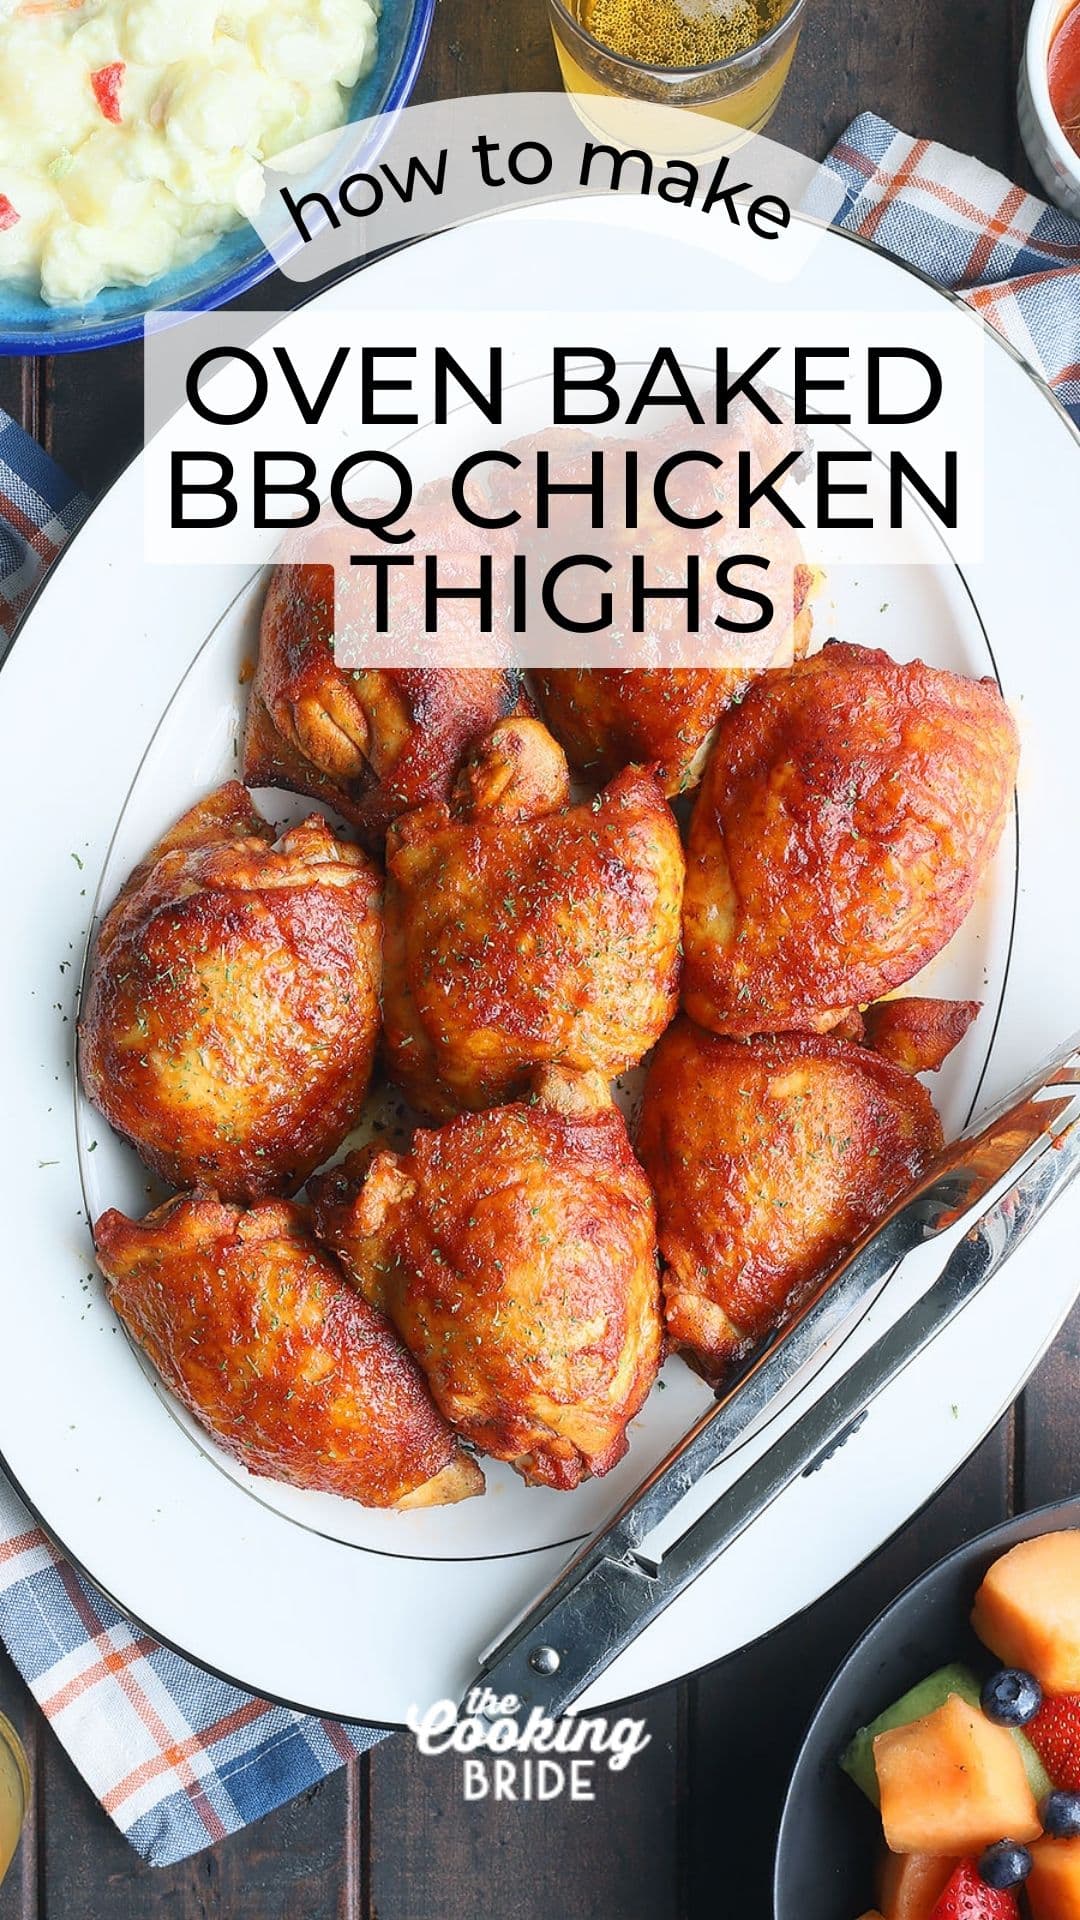 Oven Baked BBQ Chicken Thighs - The Cooking Bride